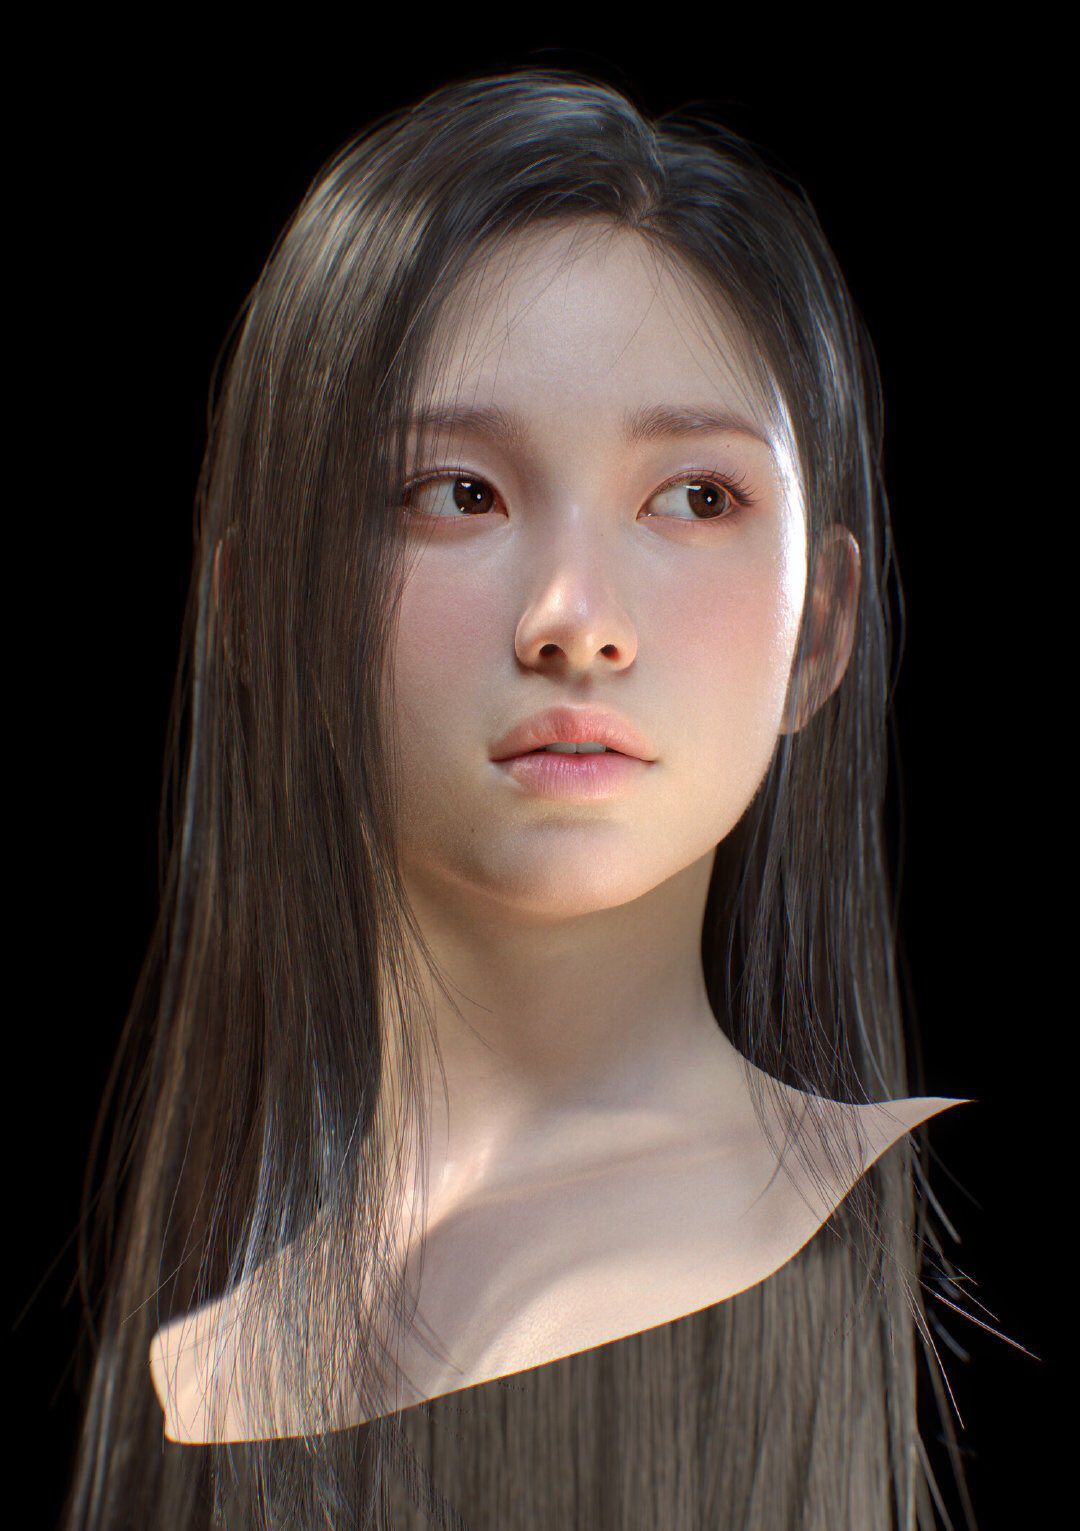 【Good news】Beautiful girl in 3DCG finally becomes indistinguishable from human 4